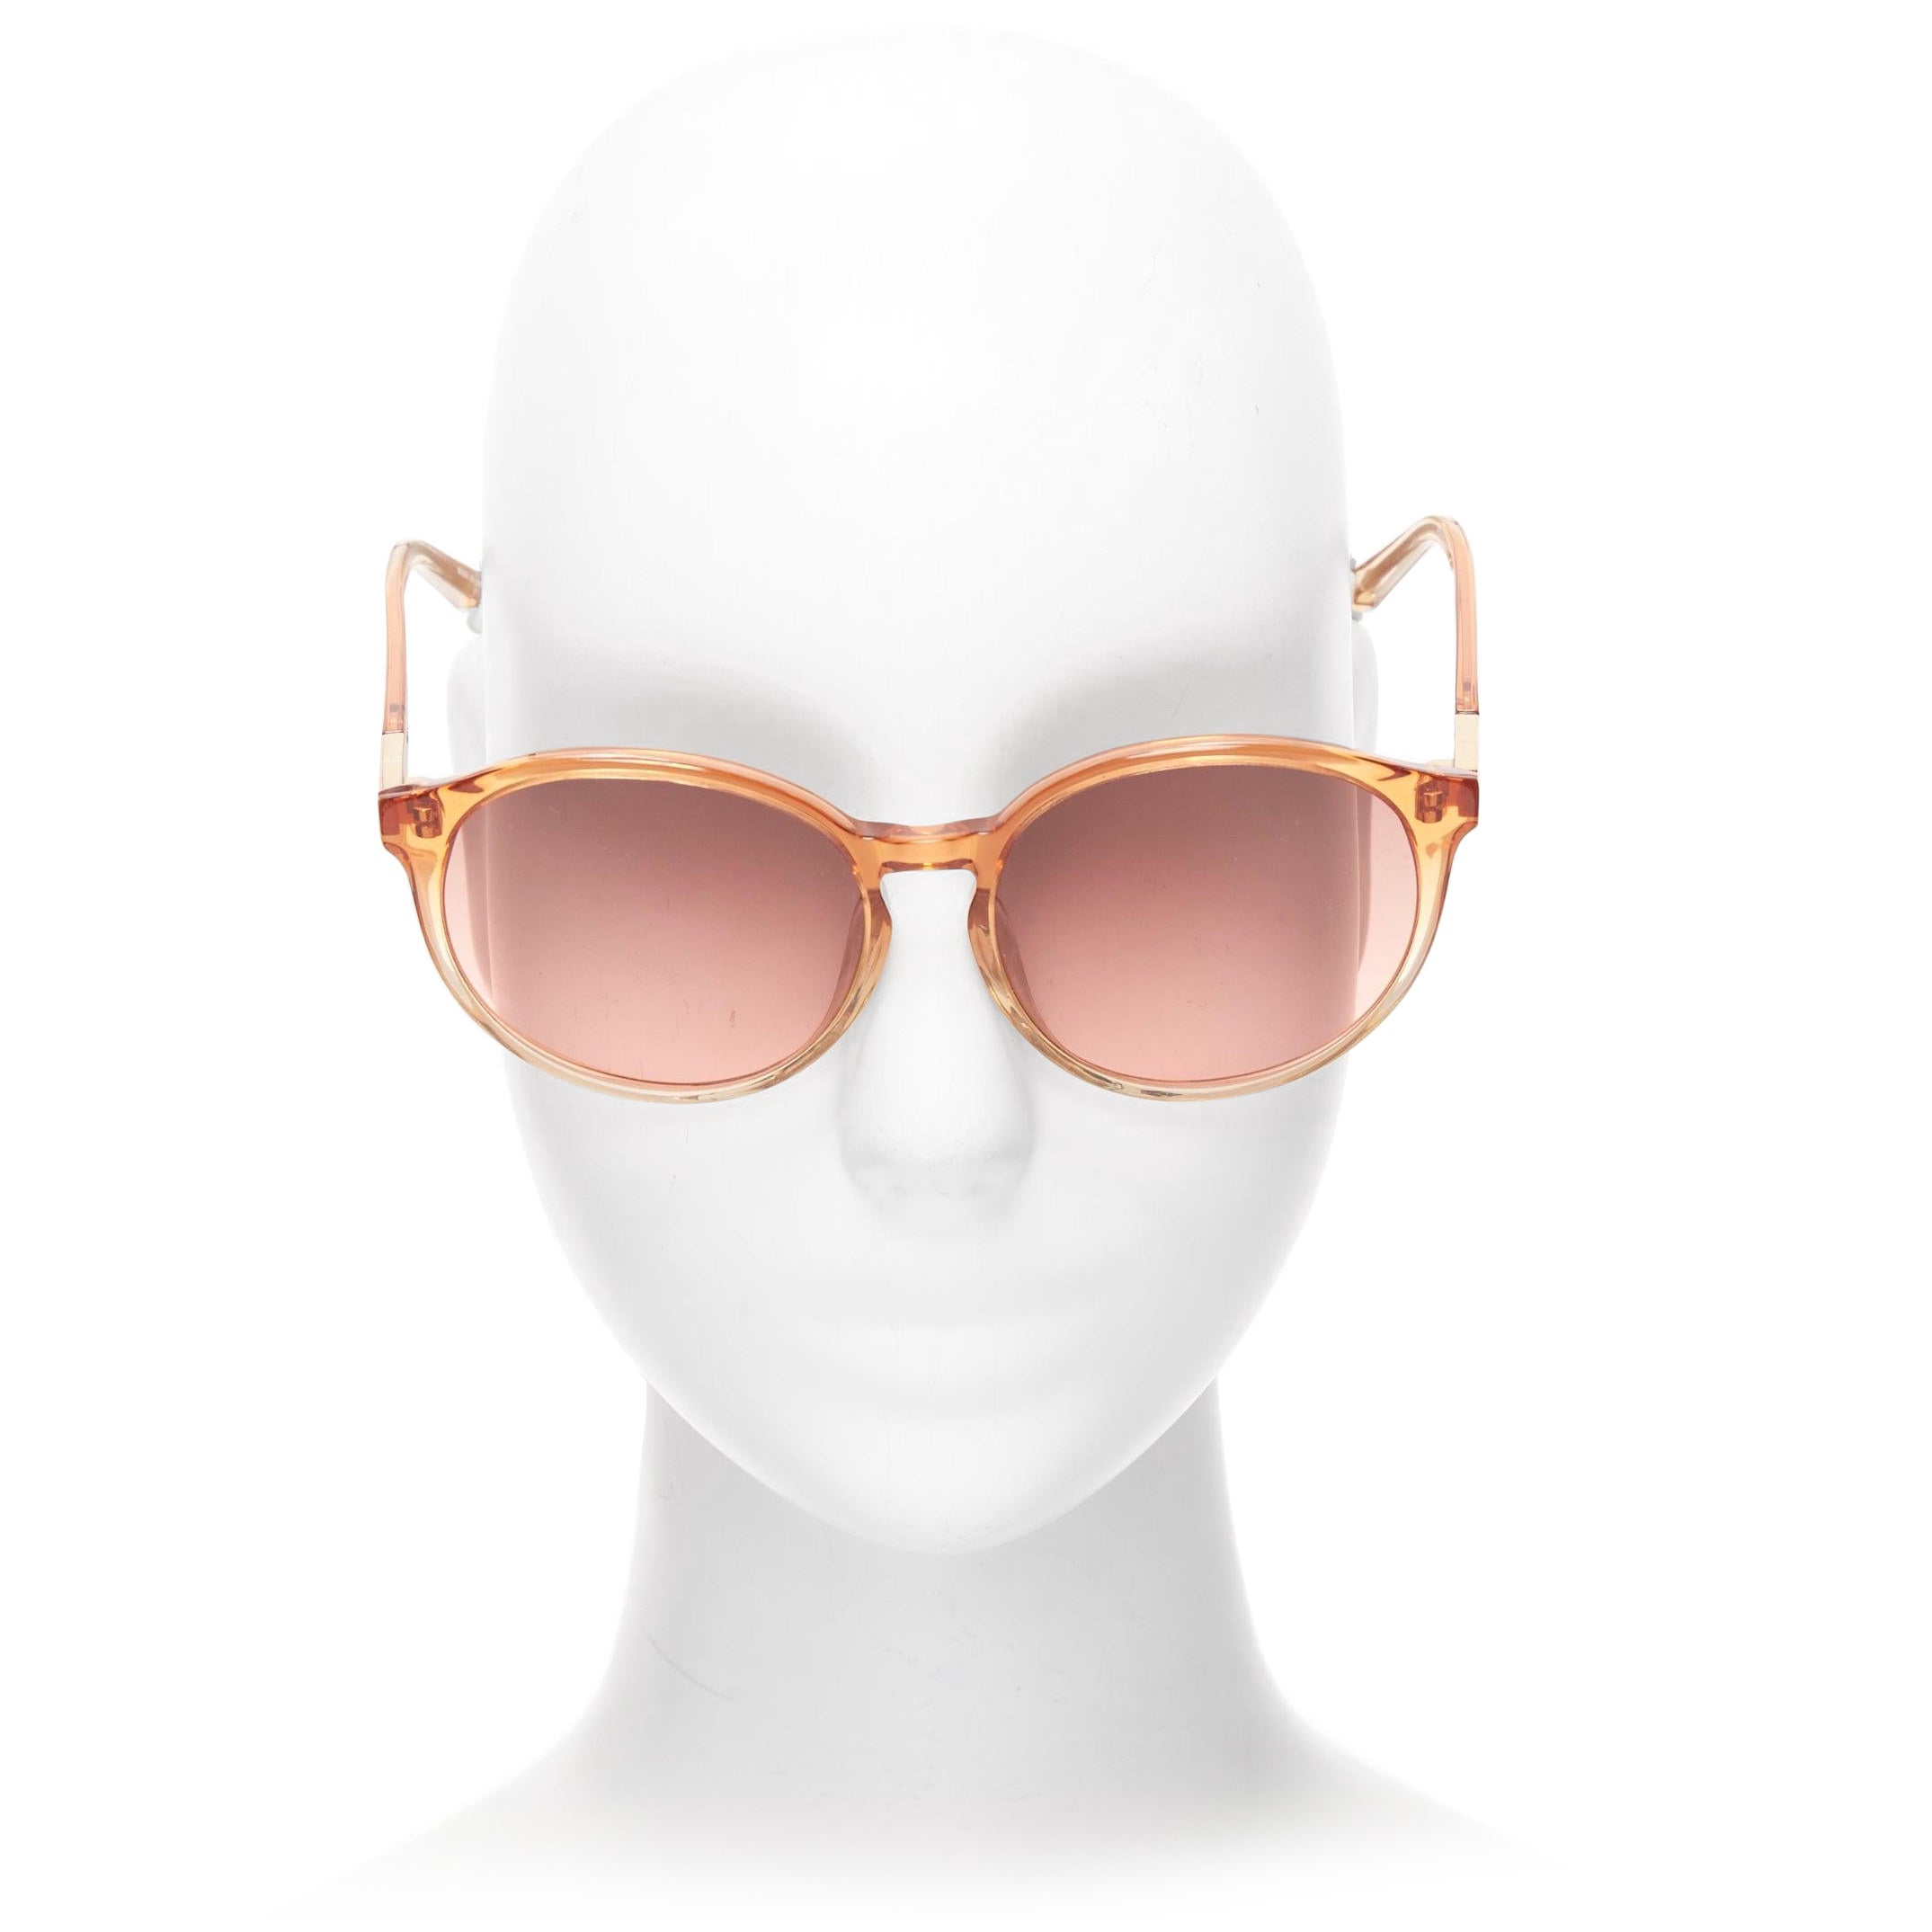 THE ROW Linda Farrow brown ombre acetate pink lens oversized sunglasses For Sale